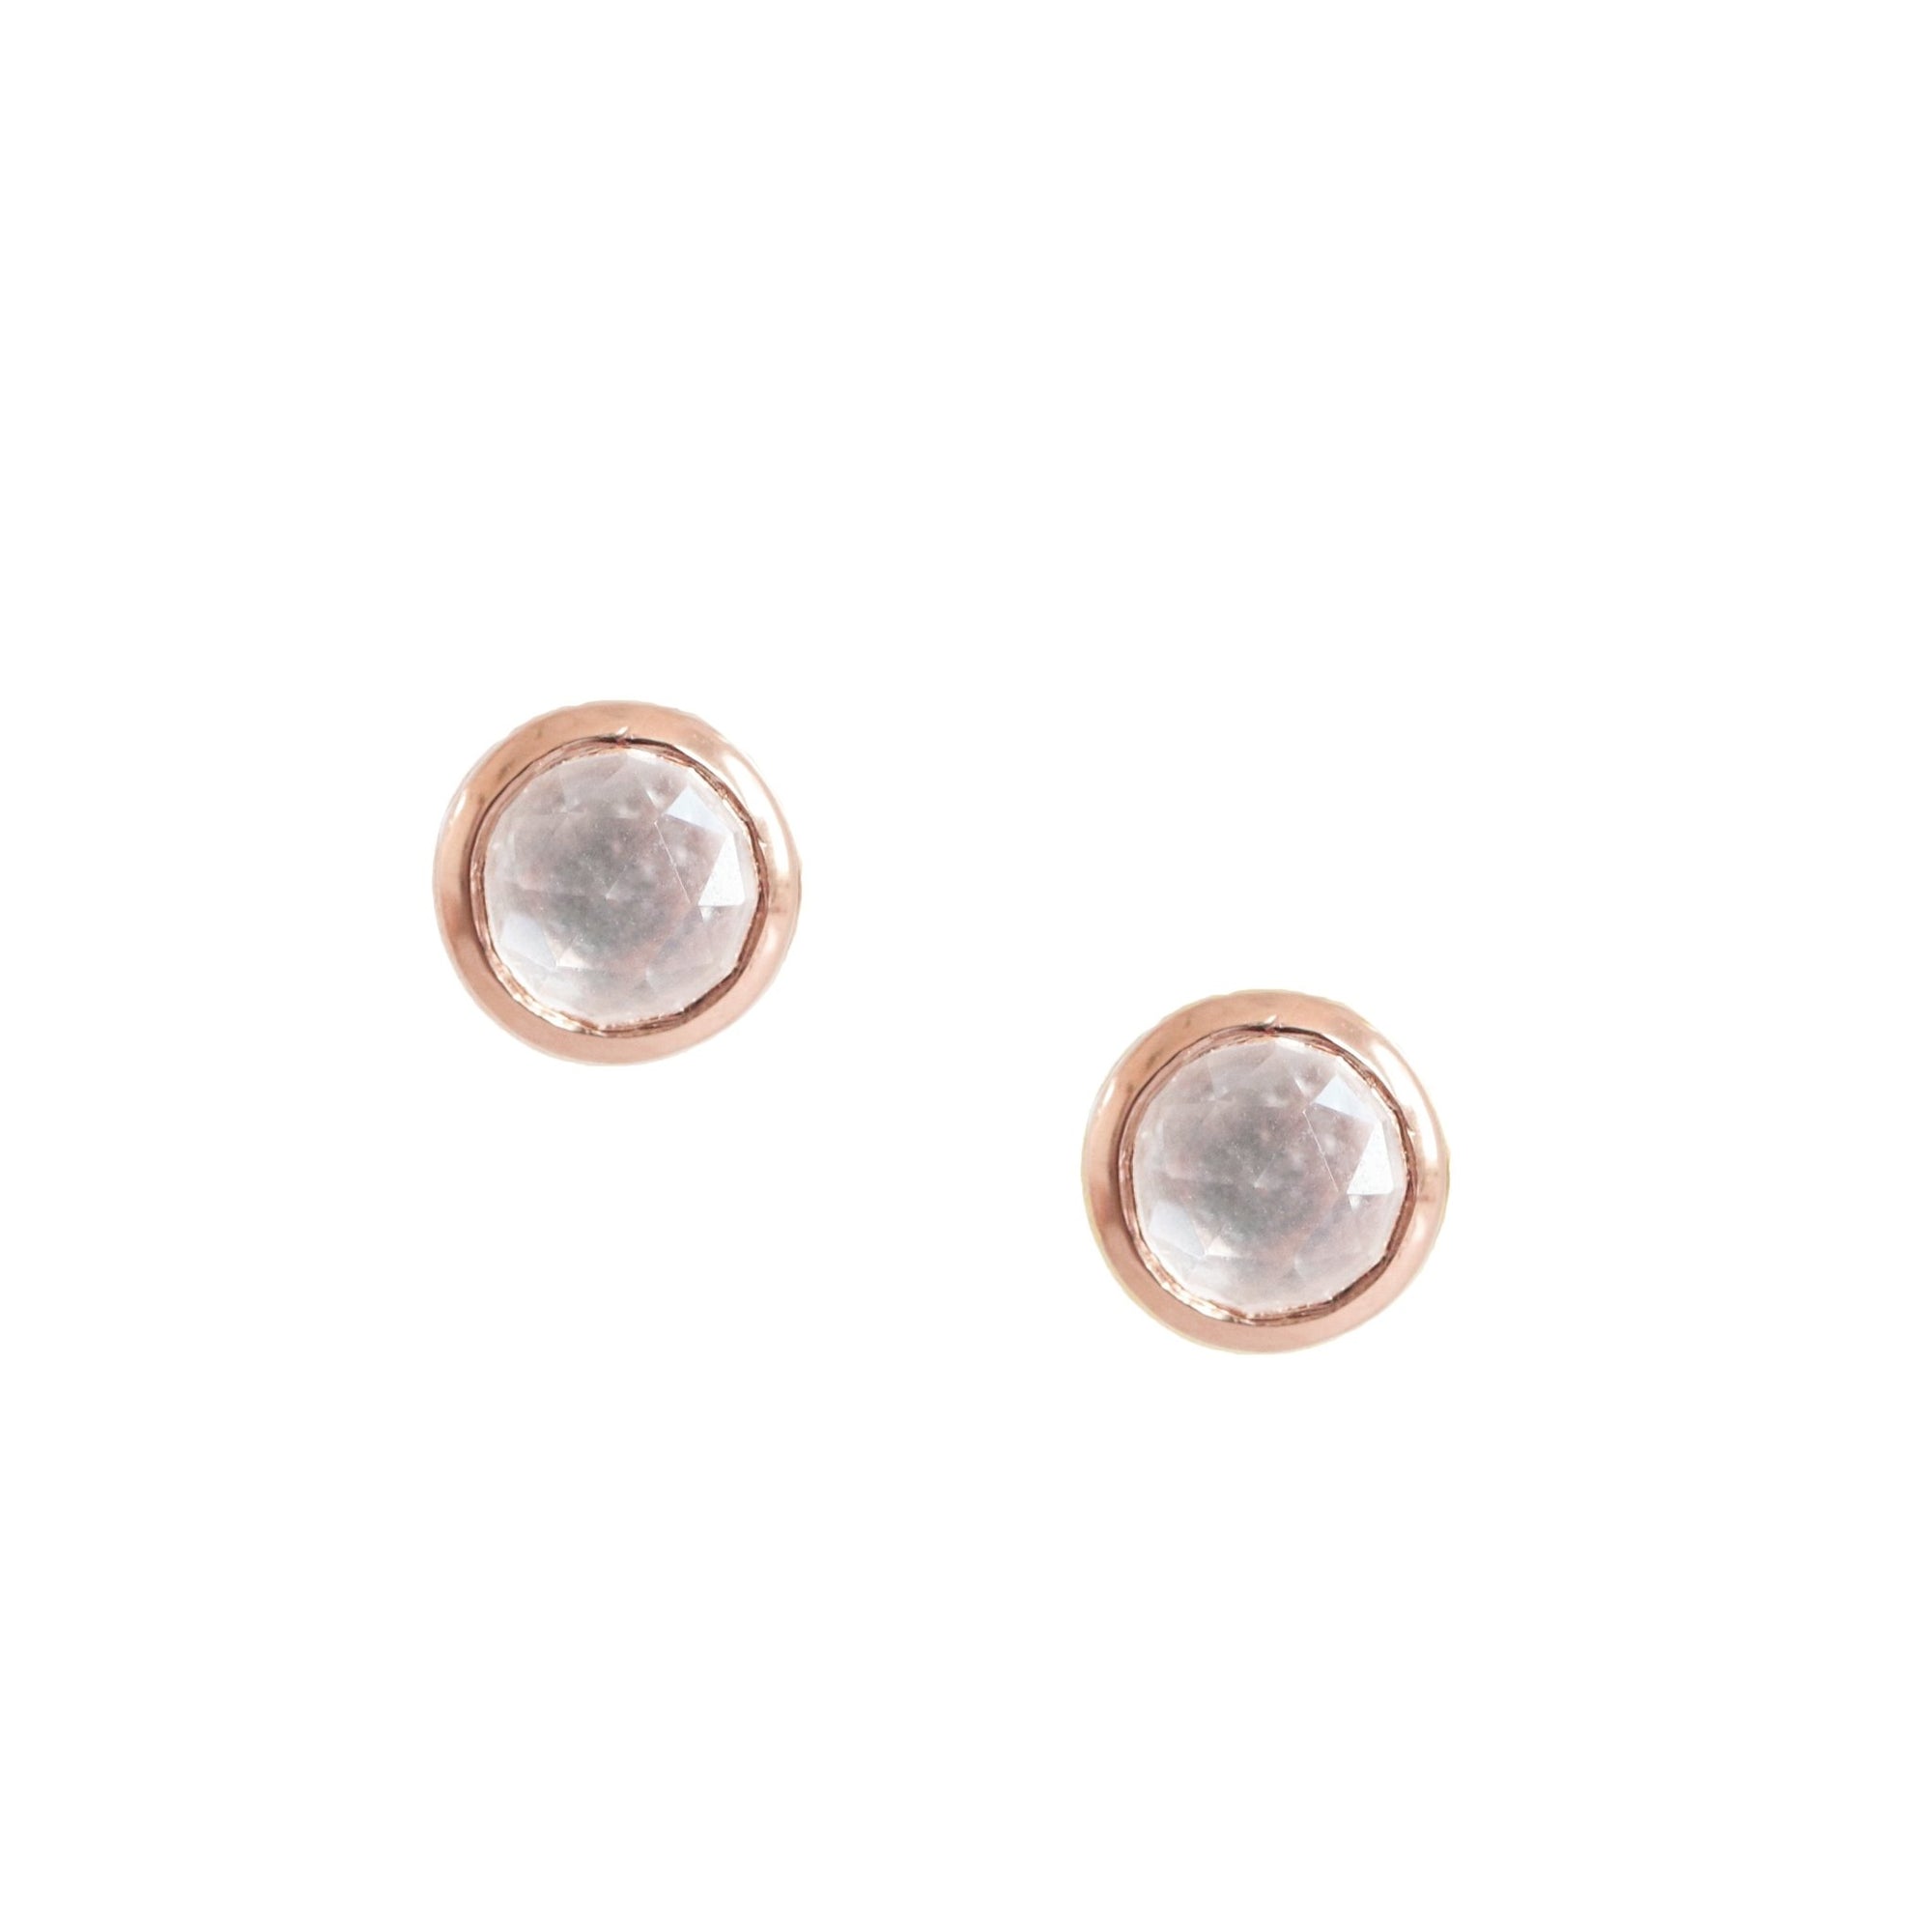 DAINTY LEGACY STUDS - WHITE TOPAZ & ROSE GOLD - SO PRETTY CARA COTTER